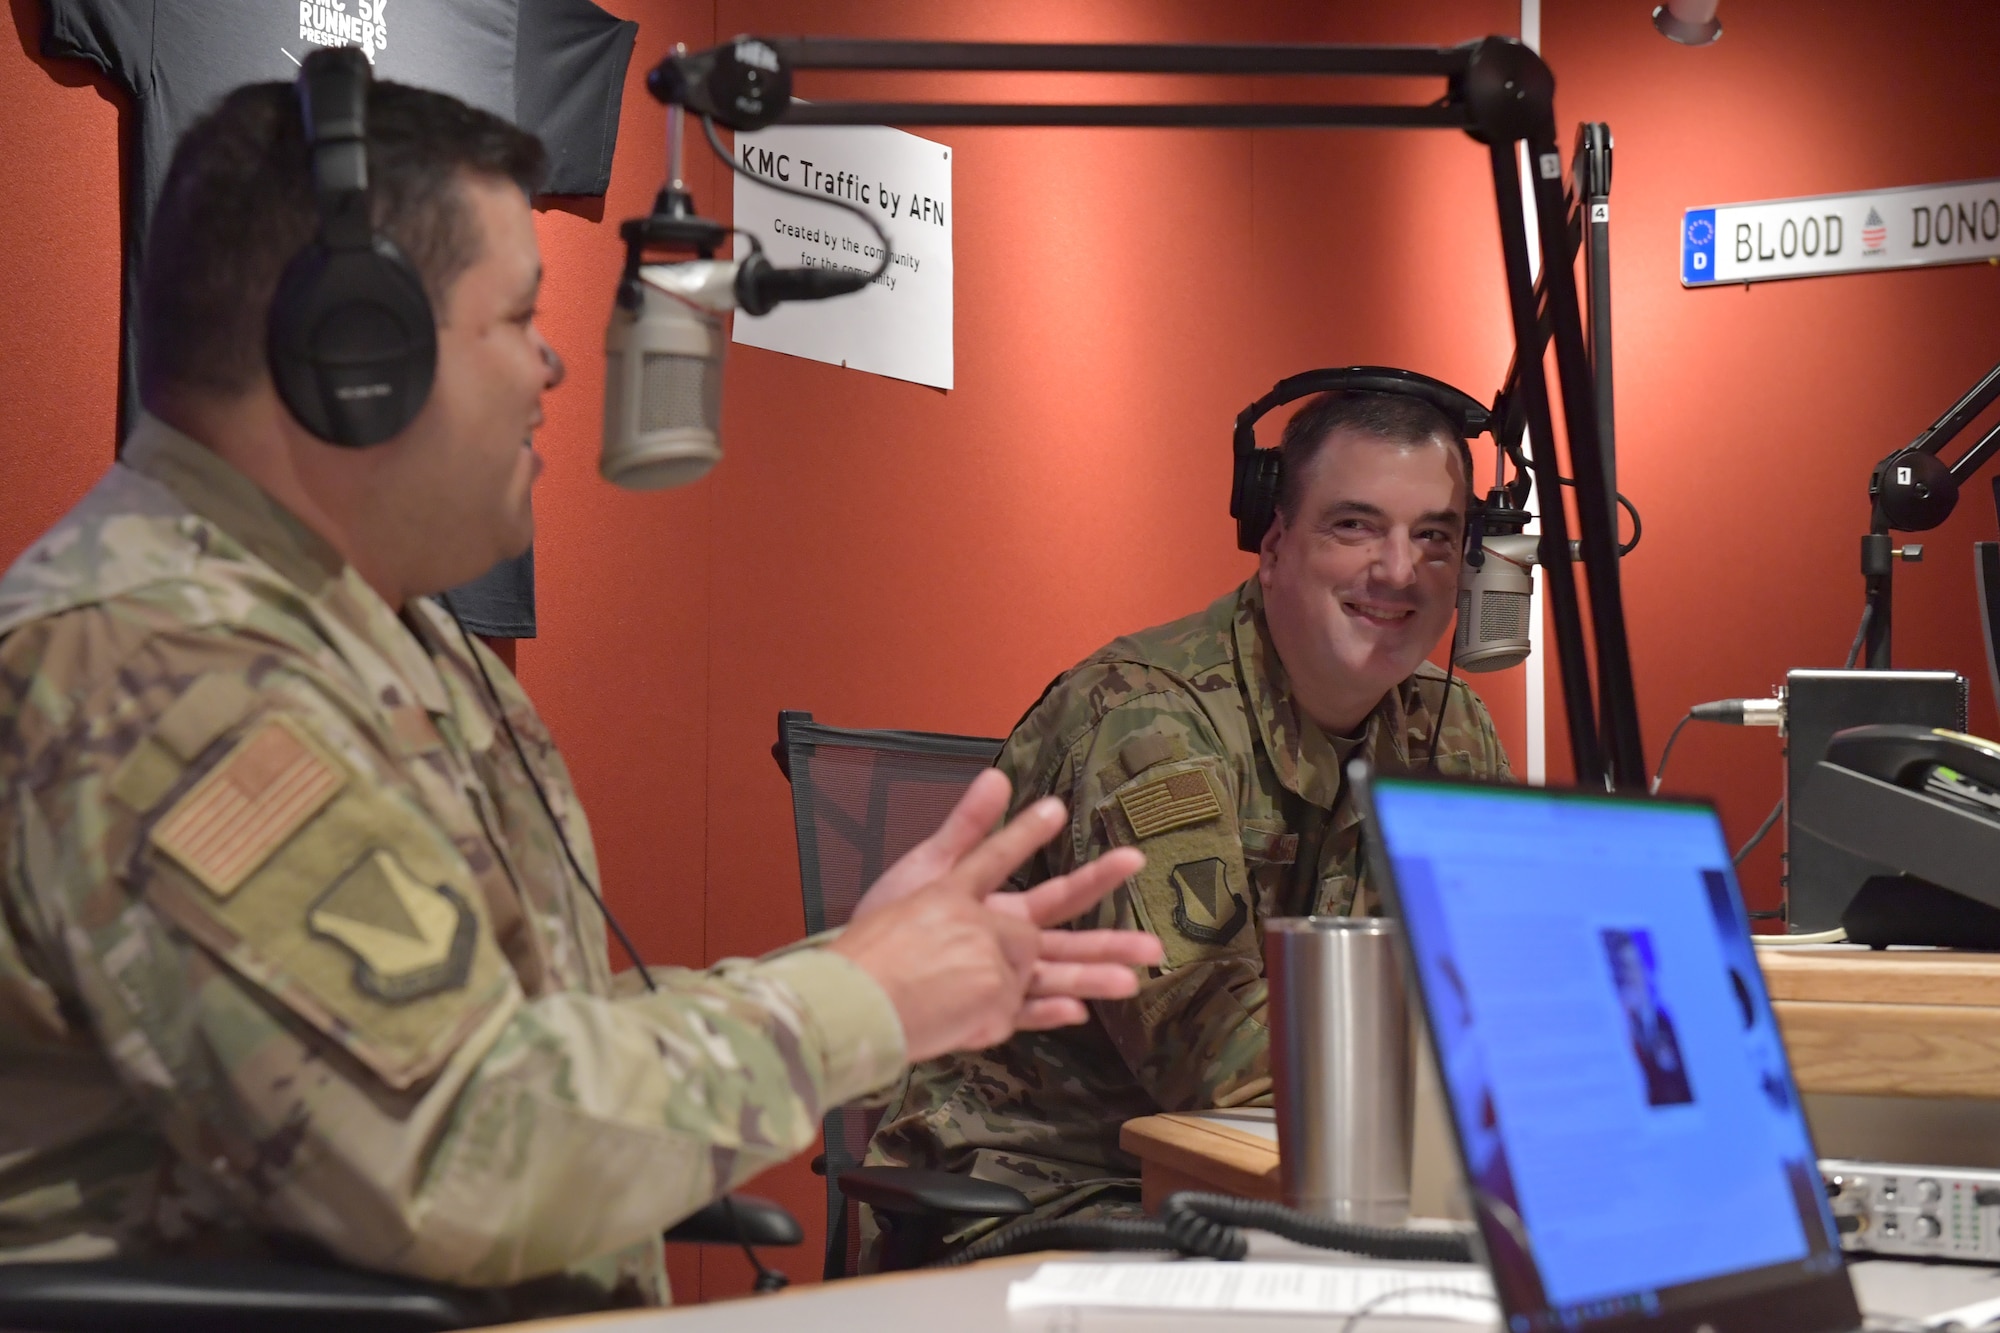 Two Airmen wearing headphones and speaking into microphones at a radio station studio.